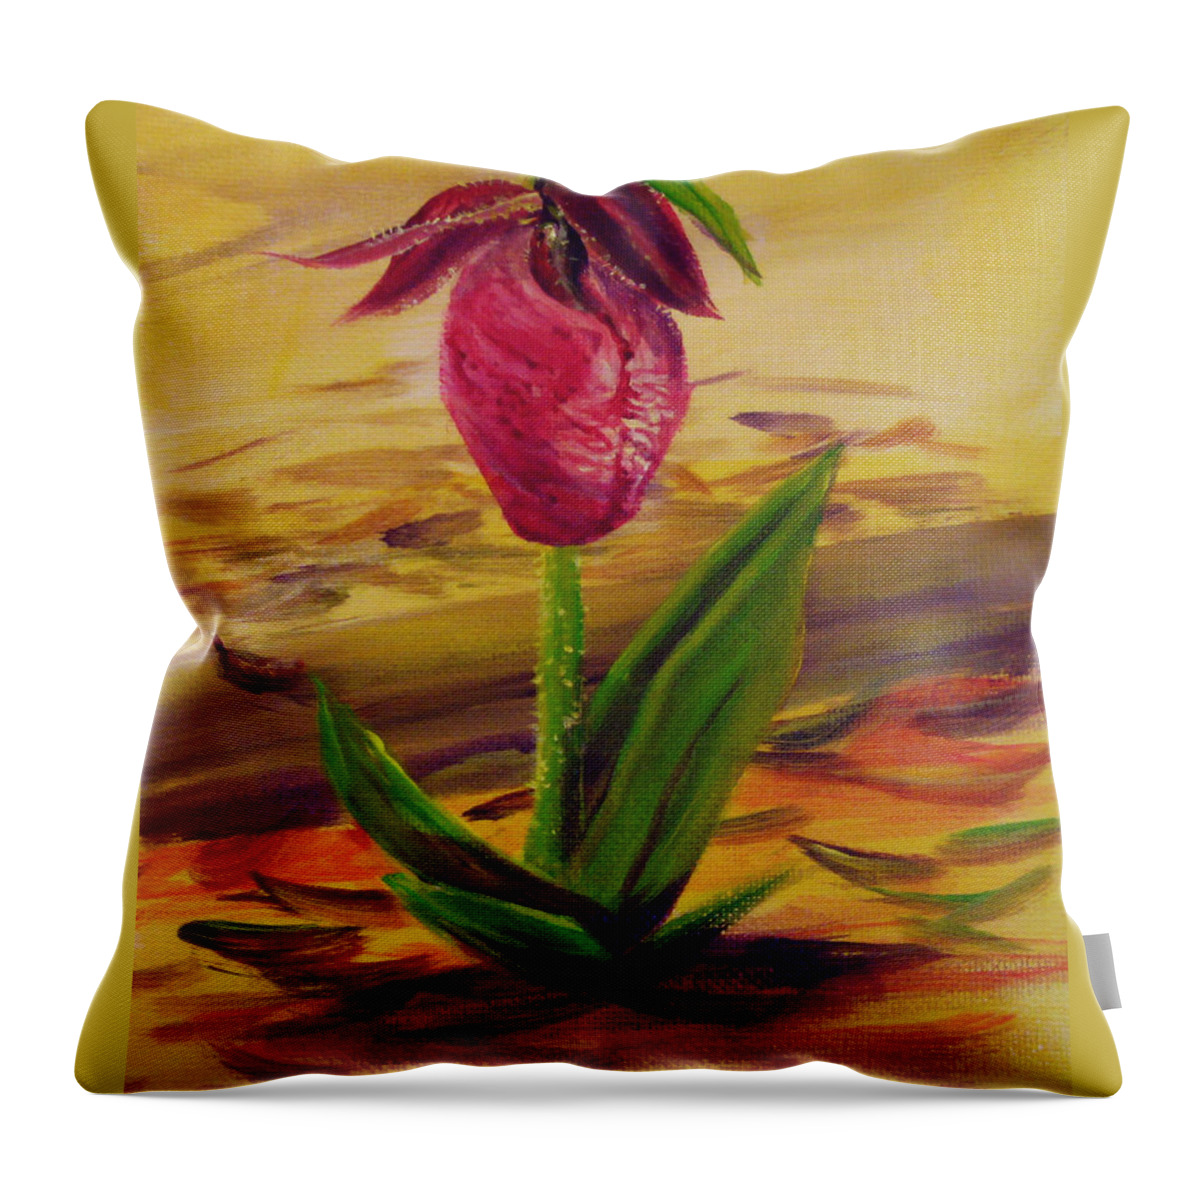 Lady-slipper Throw Pillow featuring the painting Lady's Slipper by Wayne Enslow